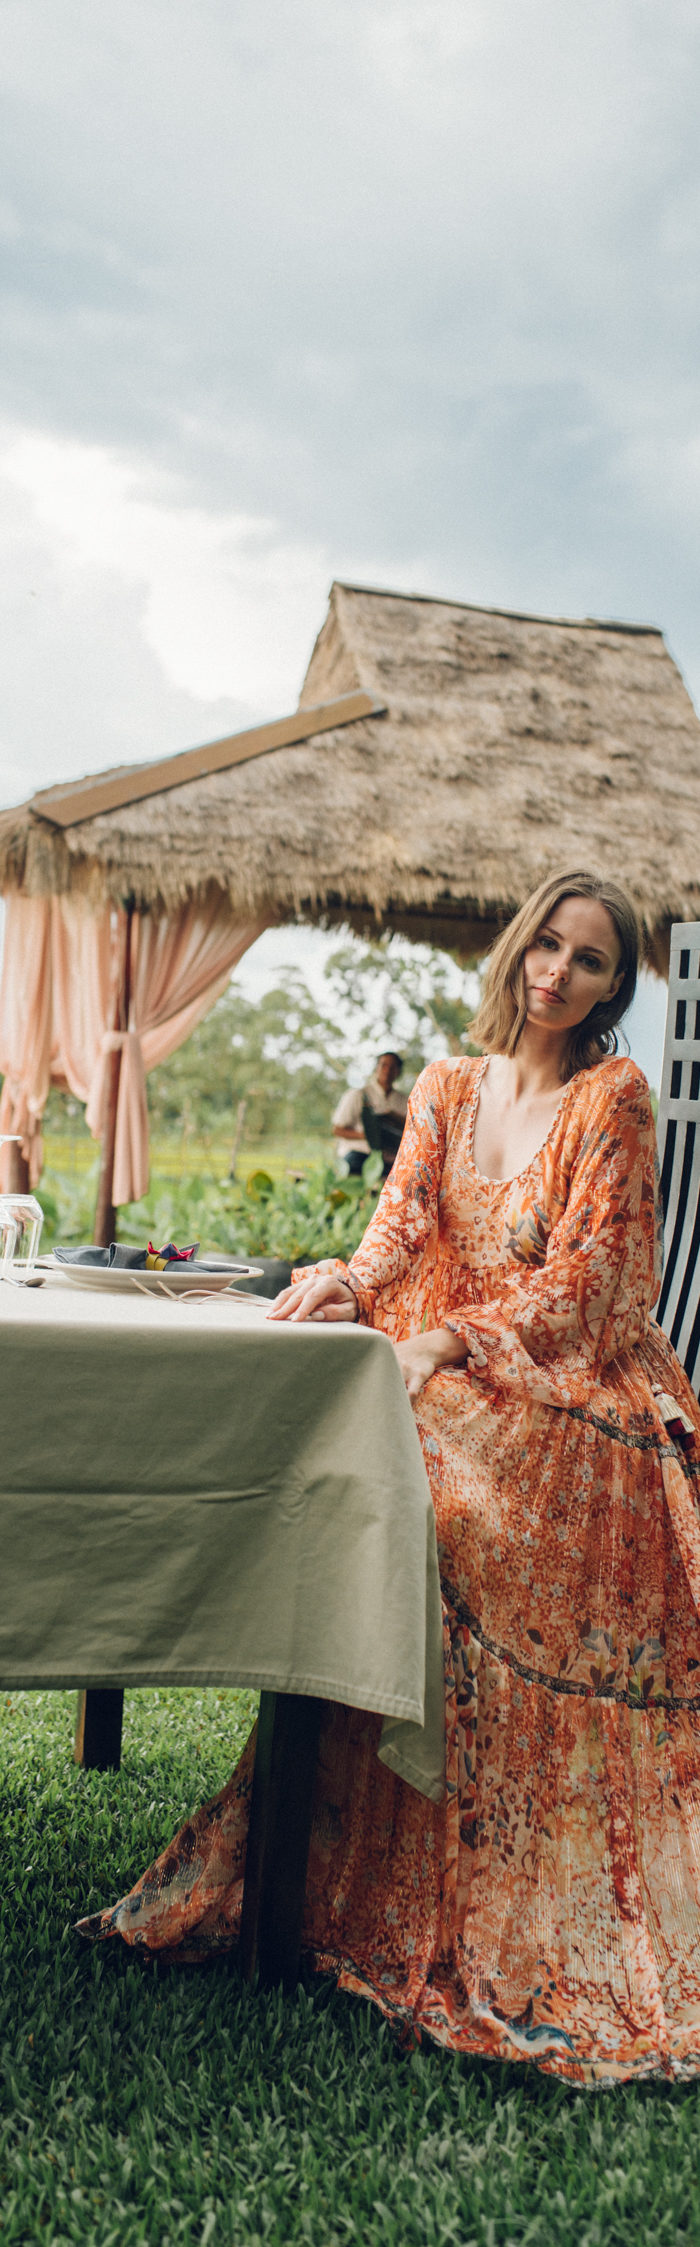 Alyssa Campanella of The A List blog shares her Siem Reap, Cambodia travel guide